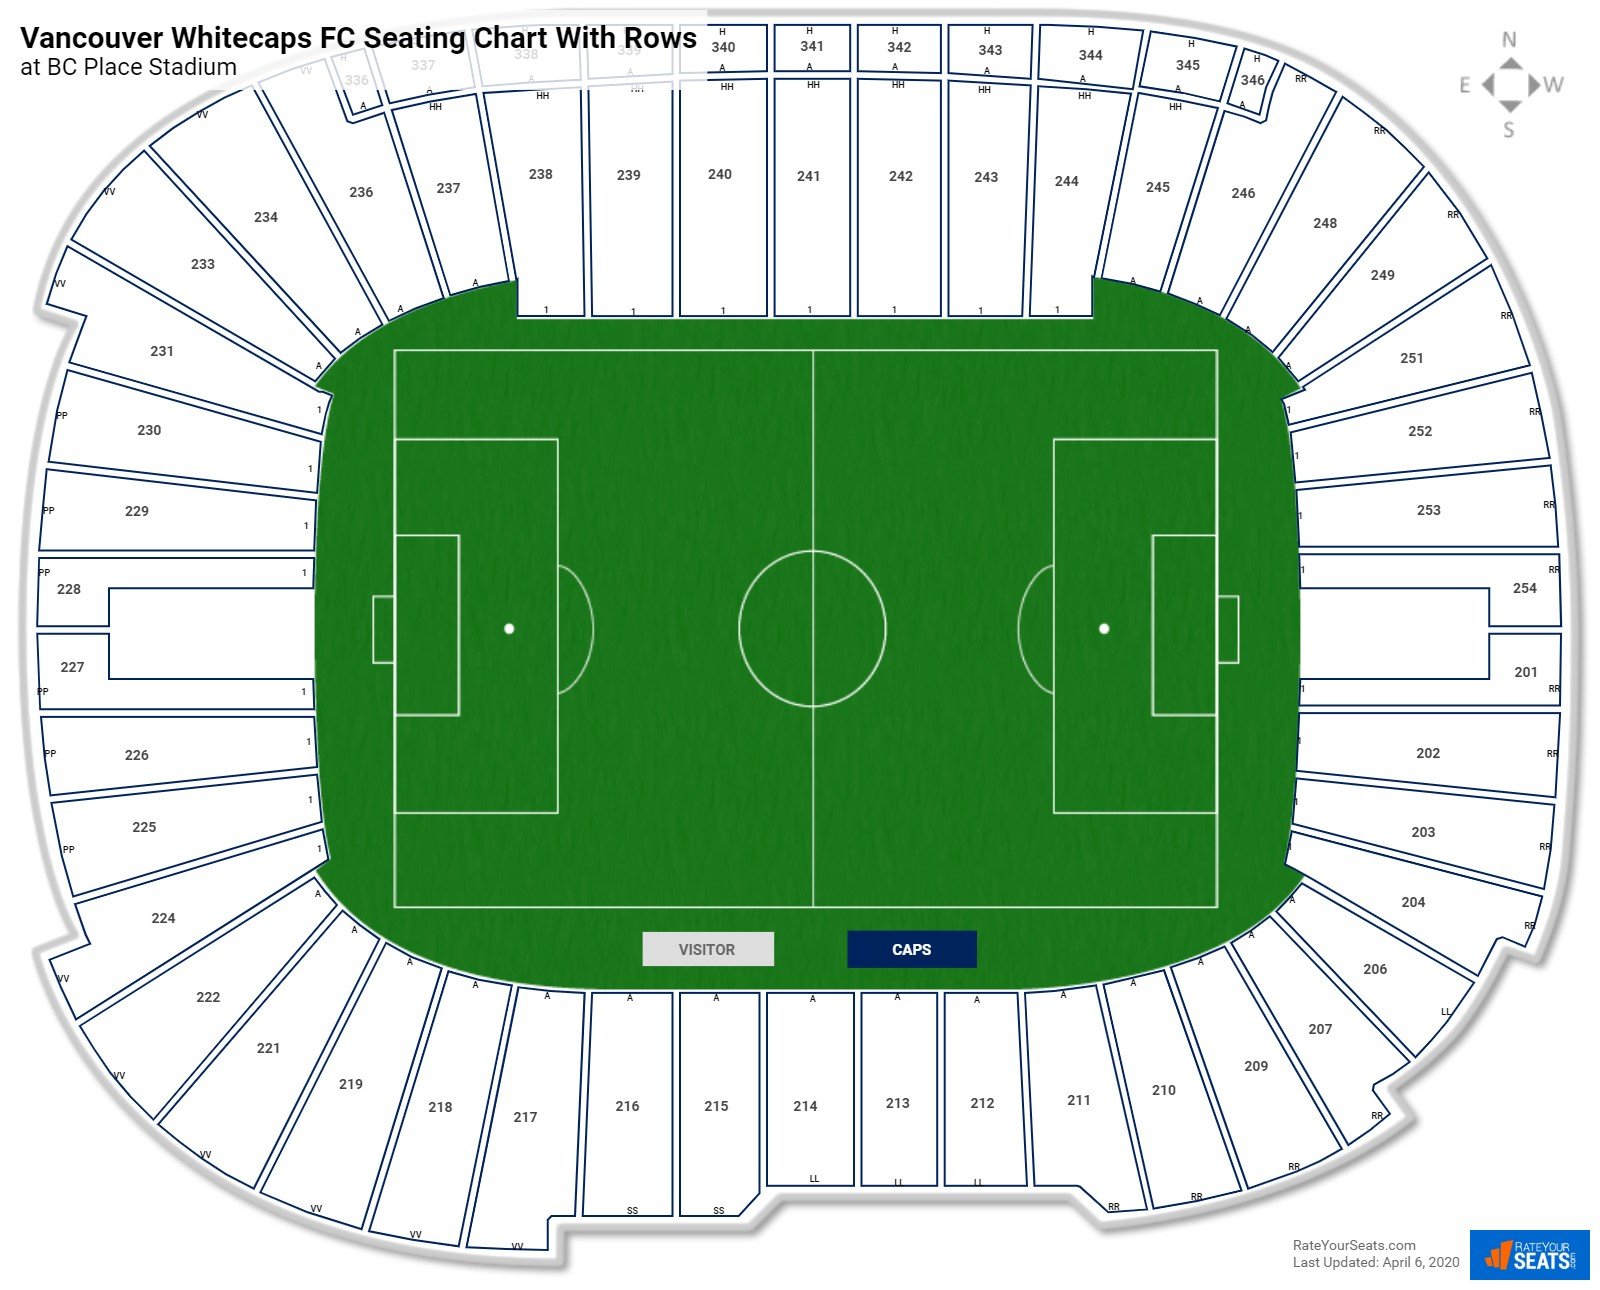 BC Place Stadium seating chart with row numbers